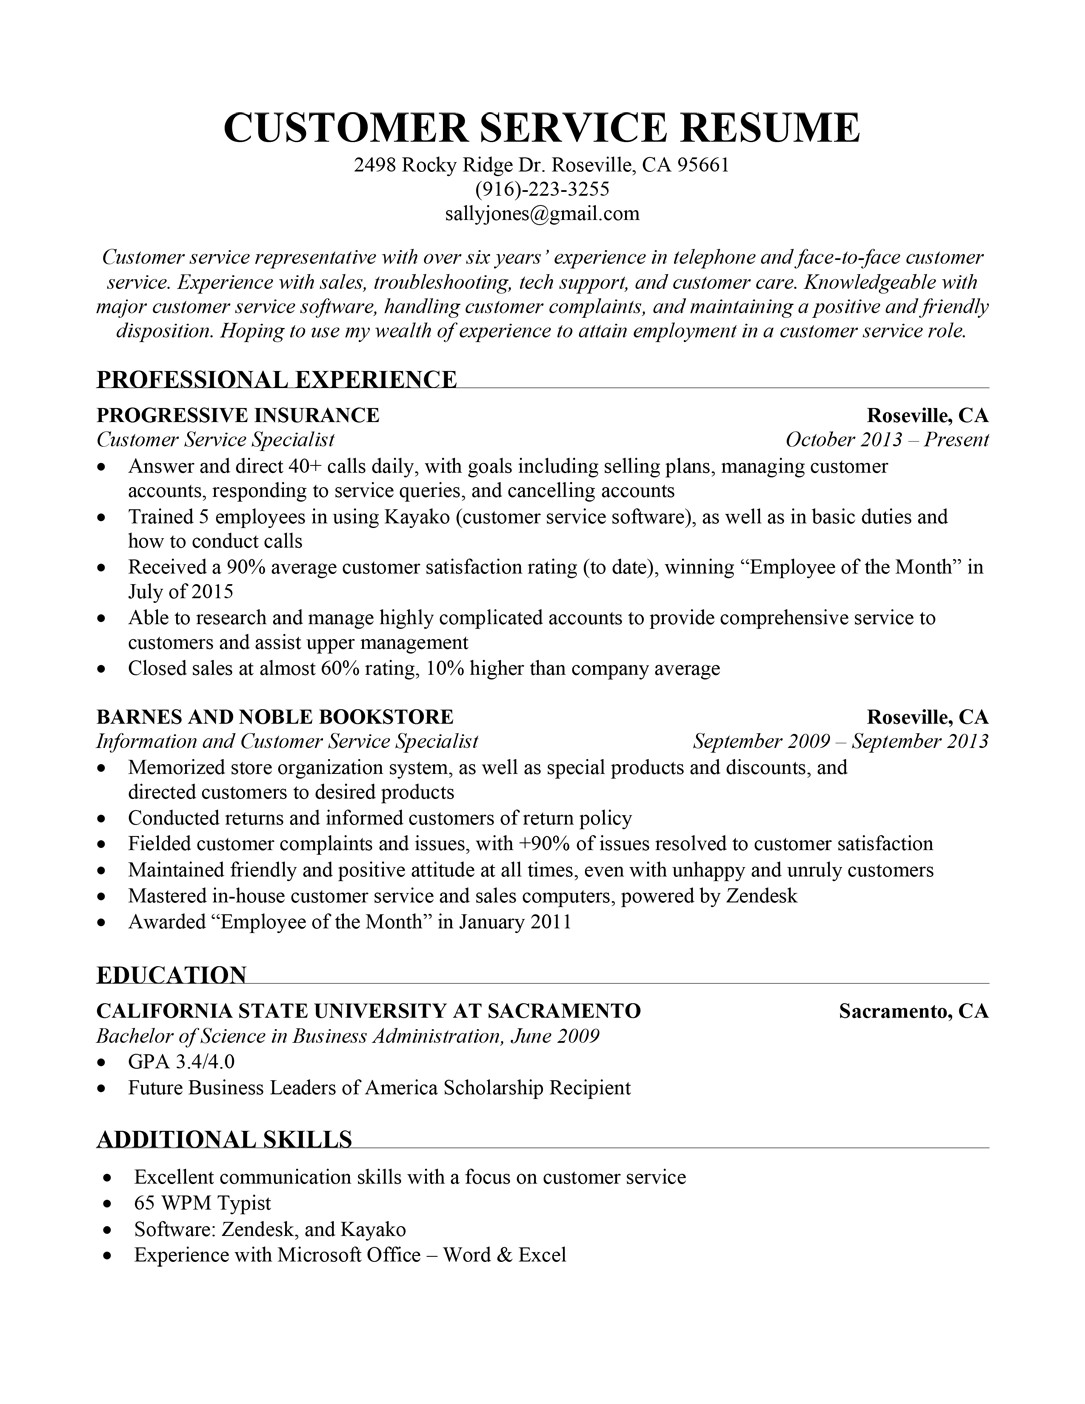 Summary Of Qualifications Sample Resume for Customer Service Customer Service Resume Sample Resume Panion